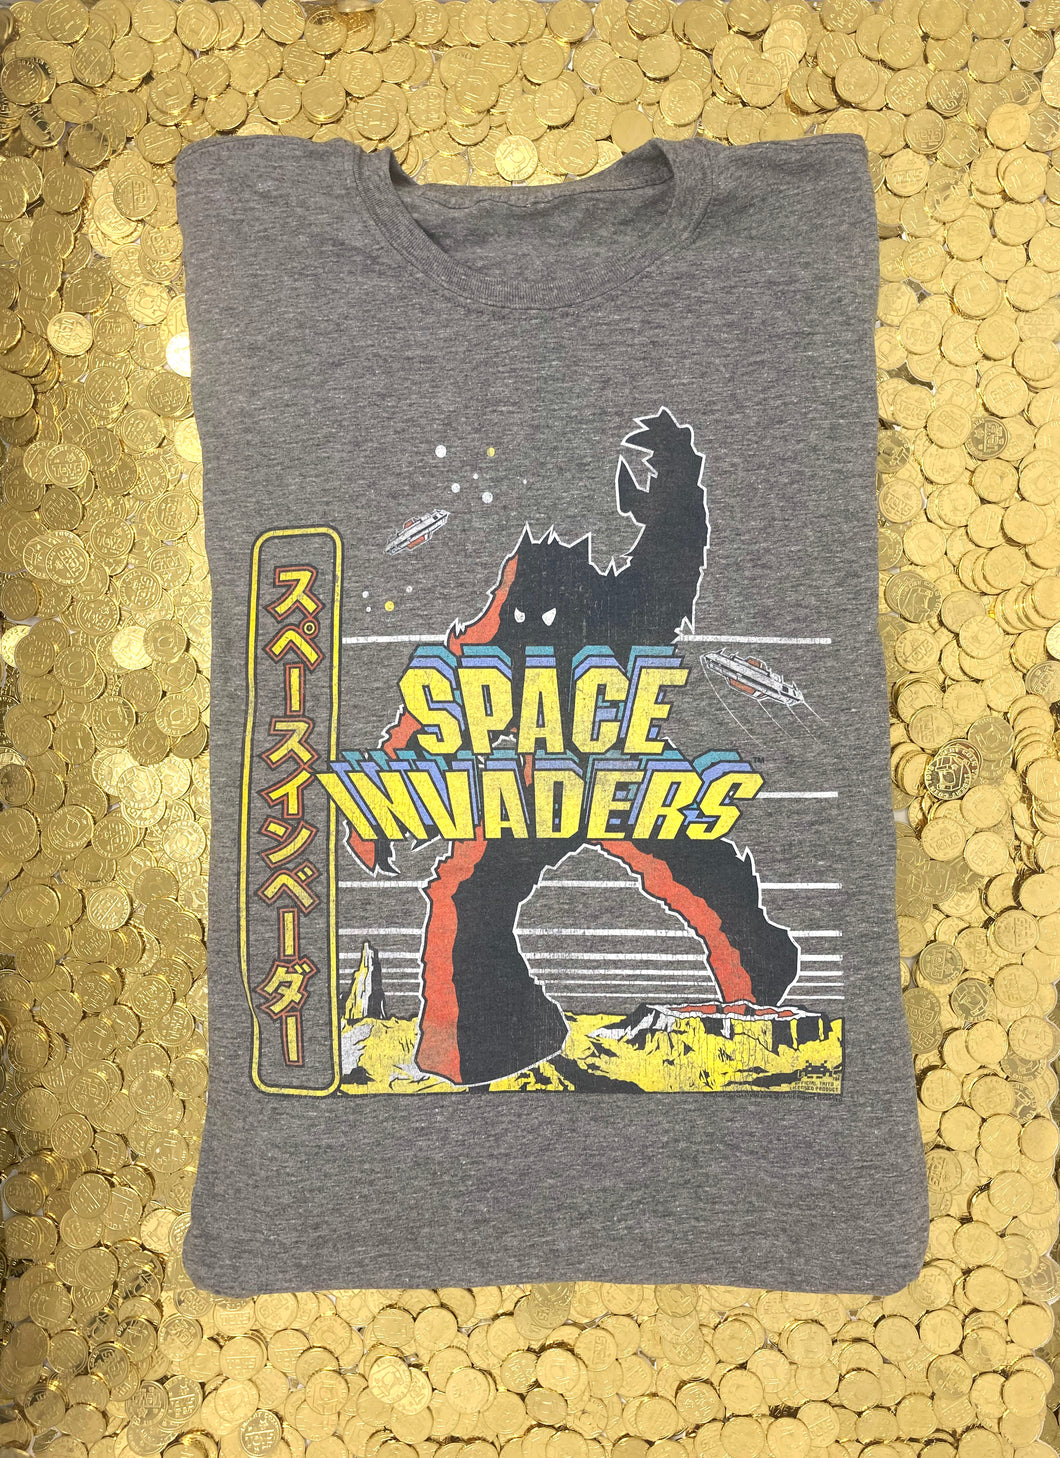 Space Invaders (Arcade Art) Japanese T-Shirt